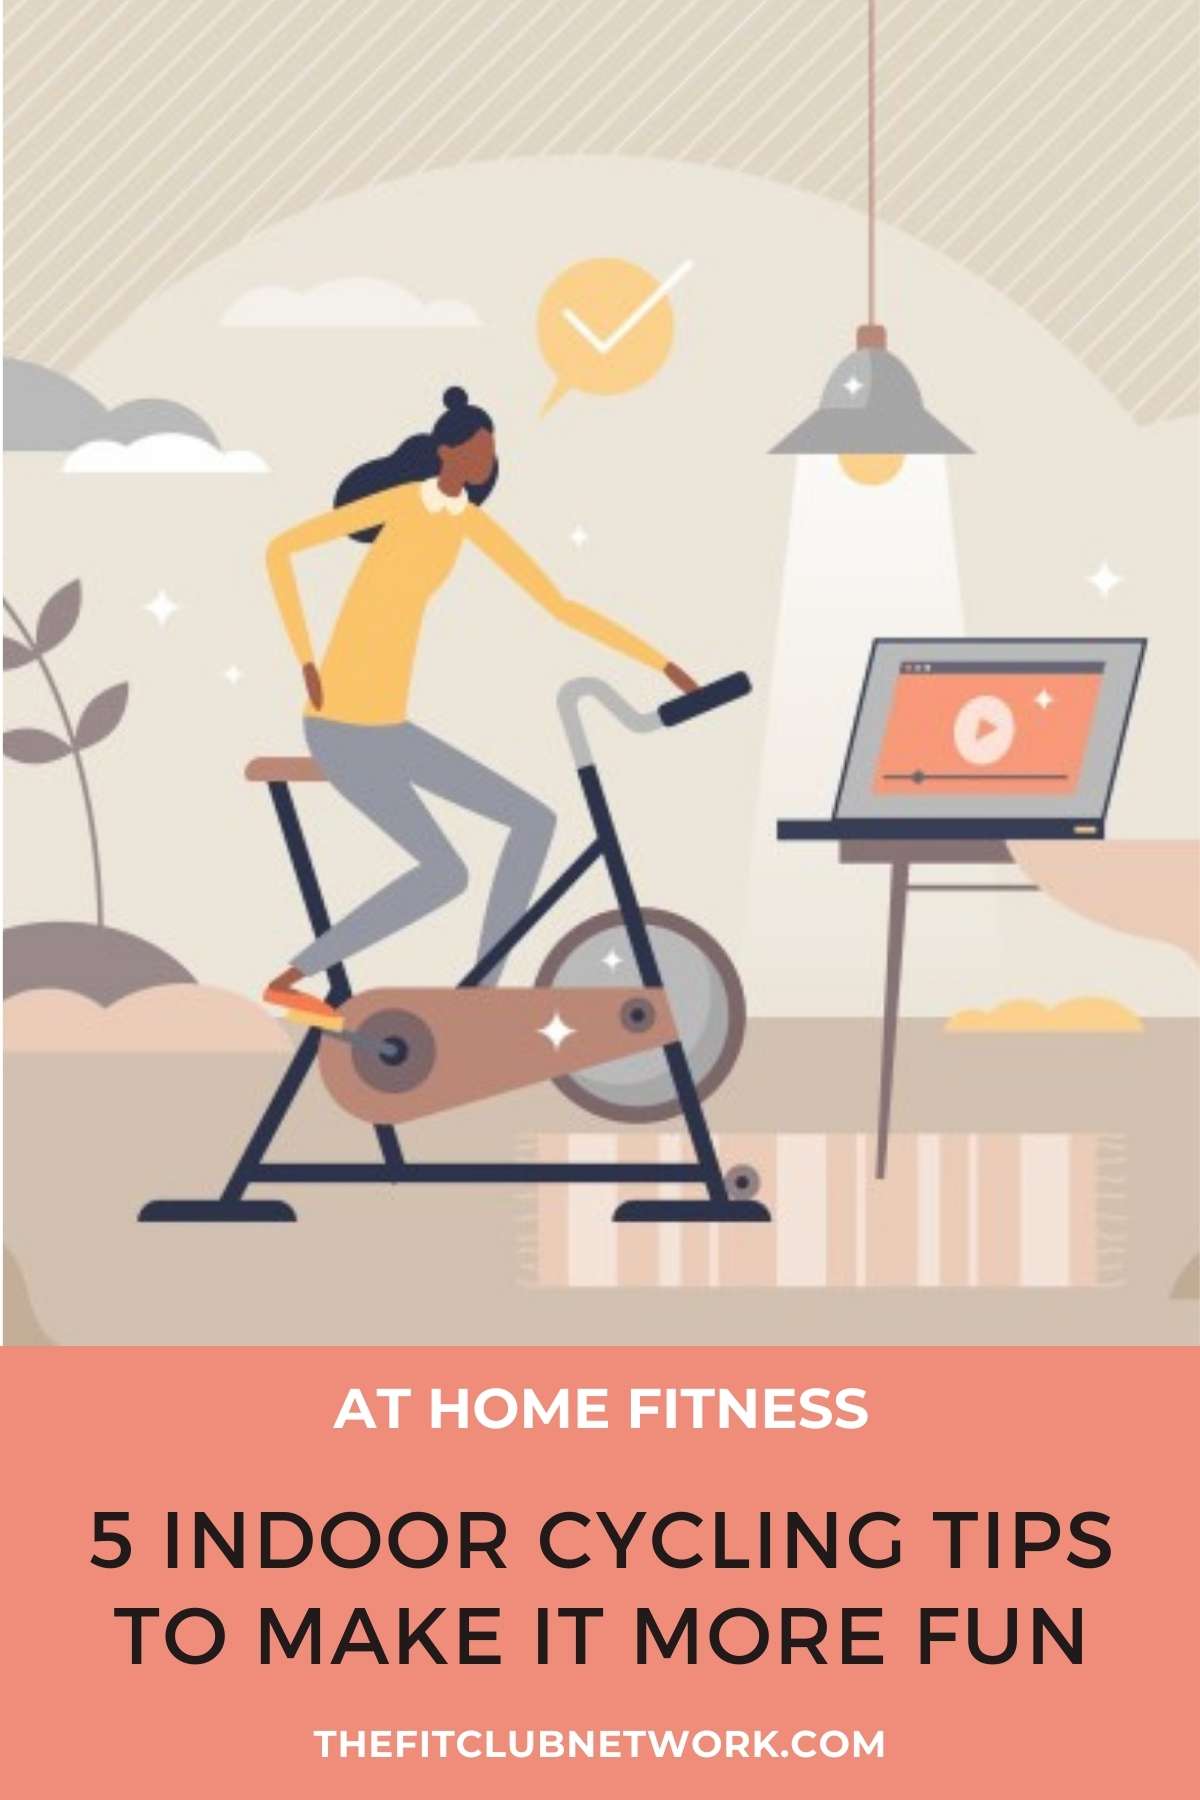 5 Indoor Cycling Tips to Make It More Comfortable & Fun